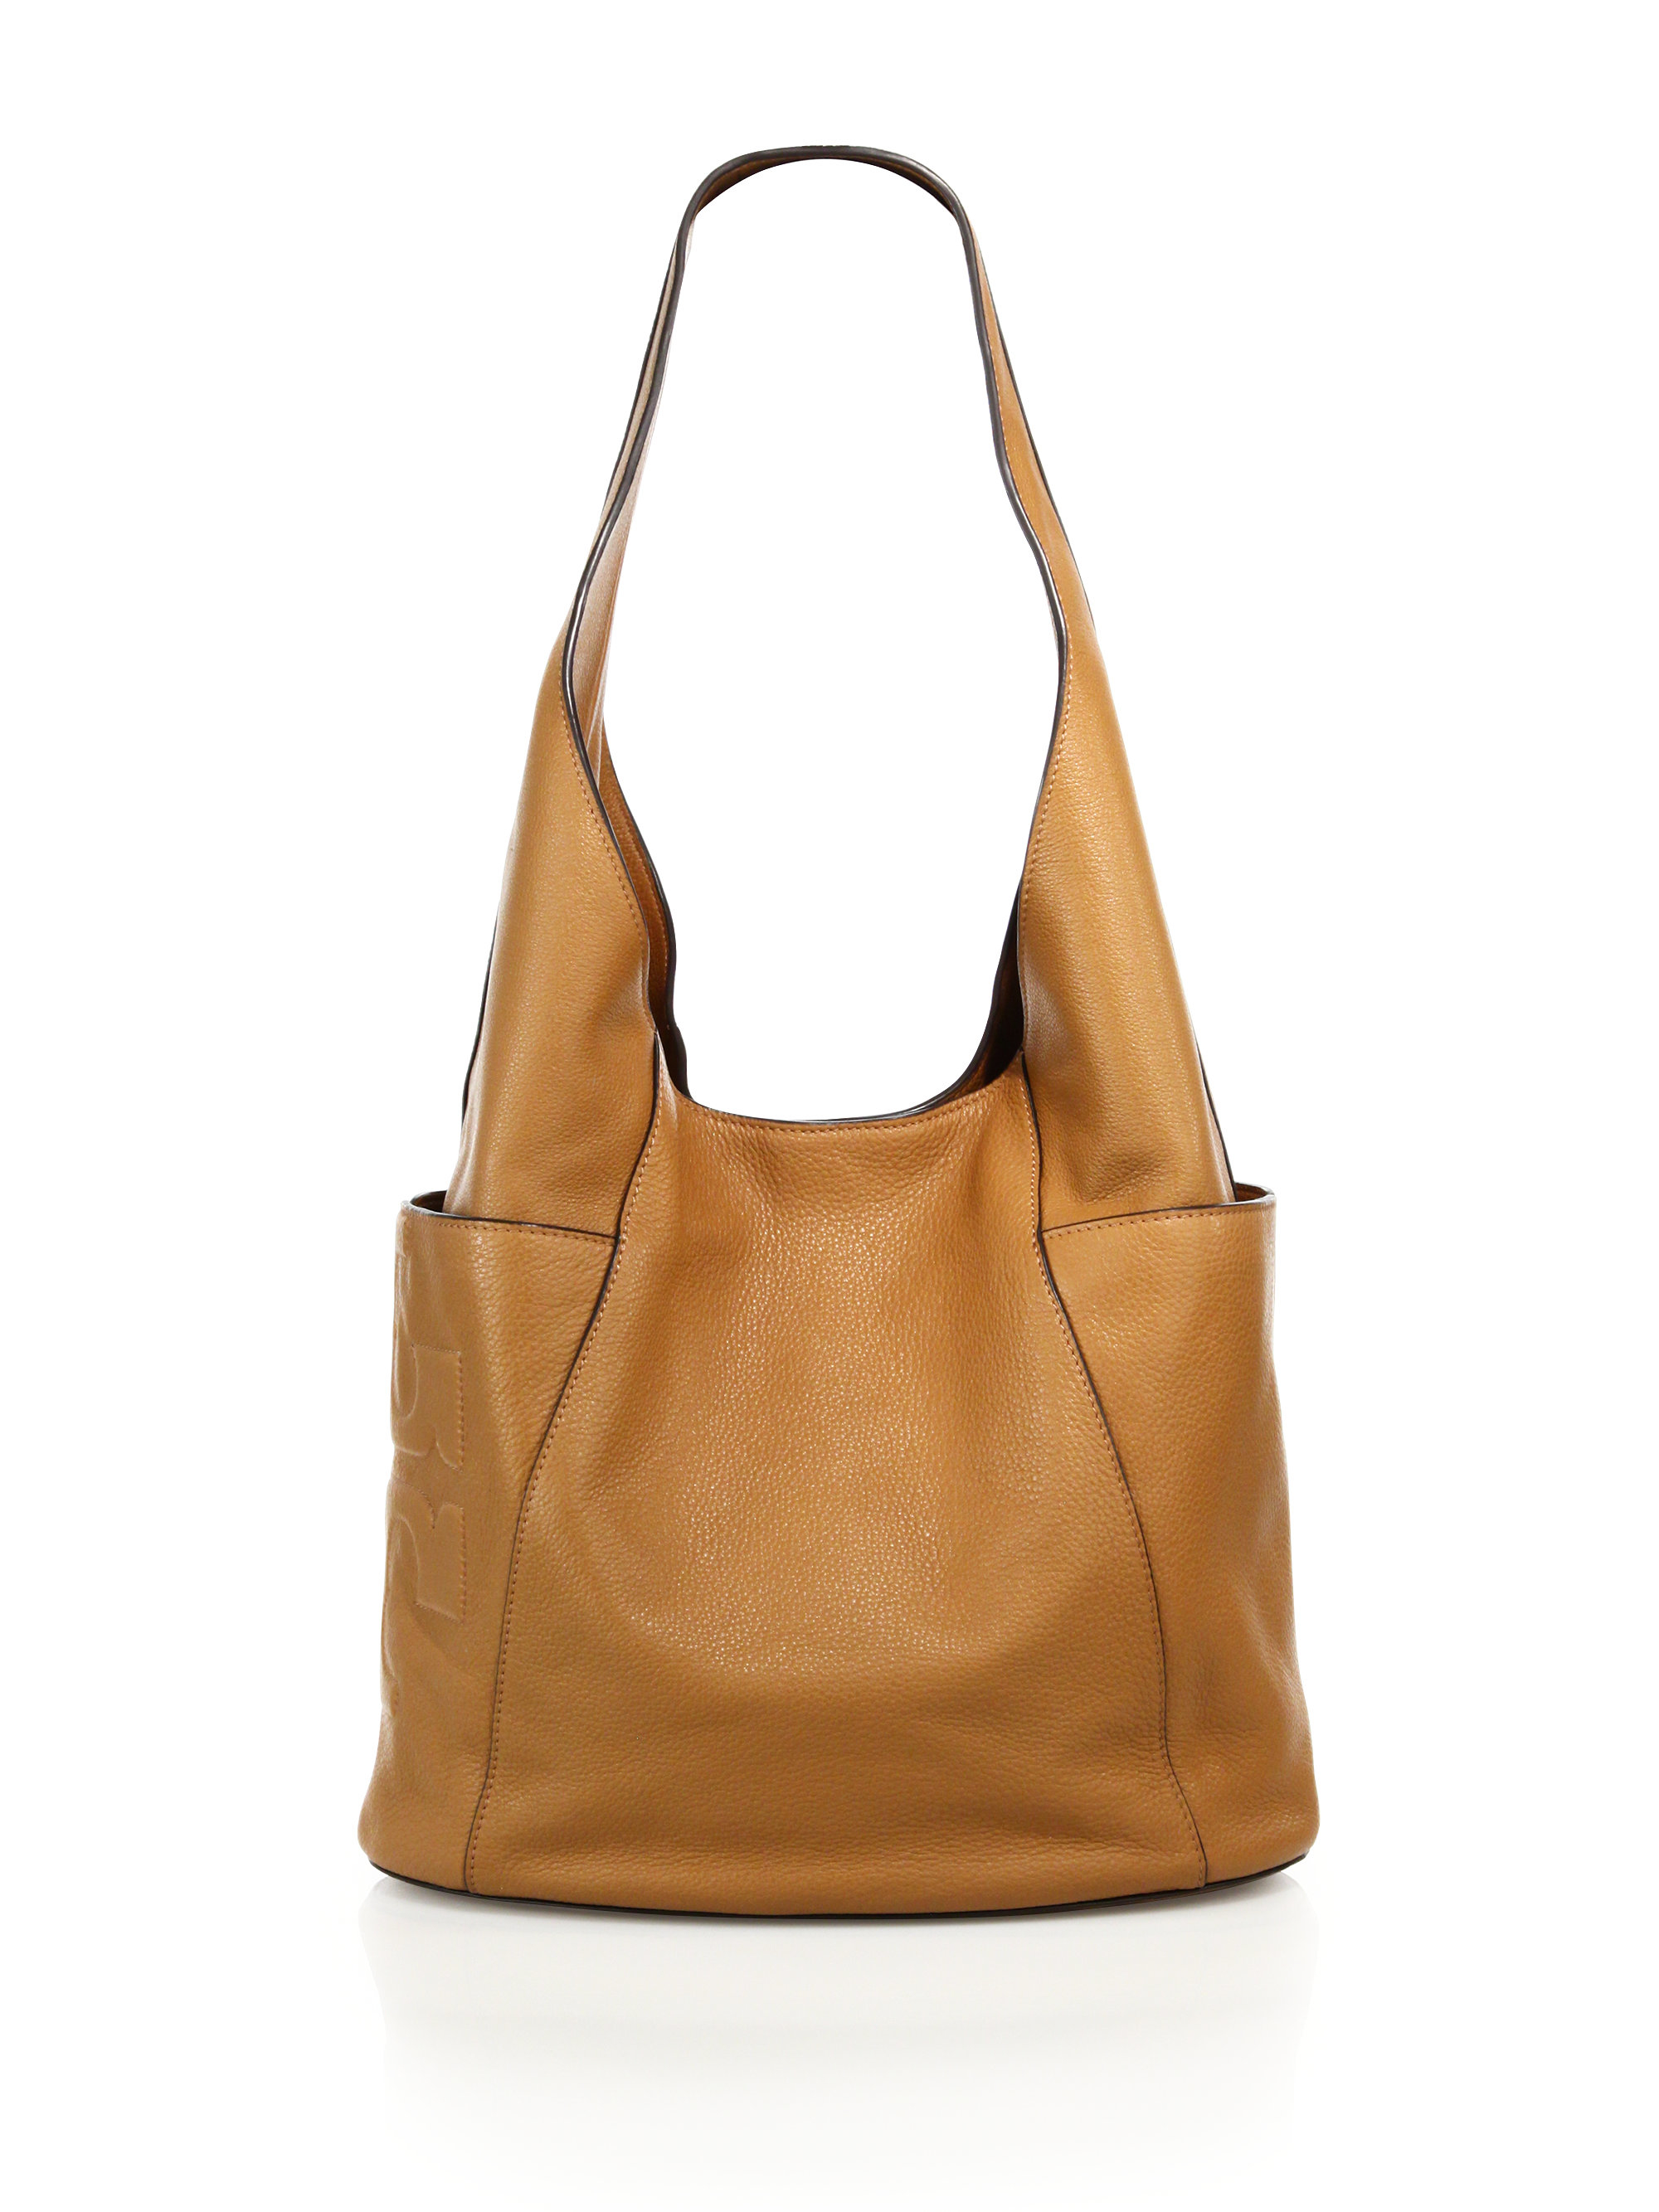 Tory burch Bombe-t Leather Hobo in Brown | Lyst